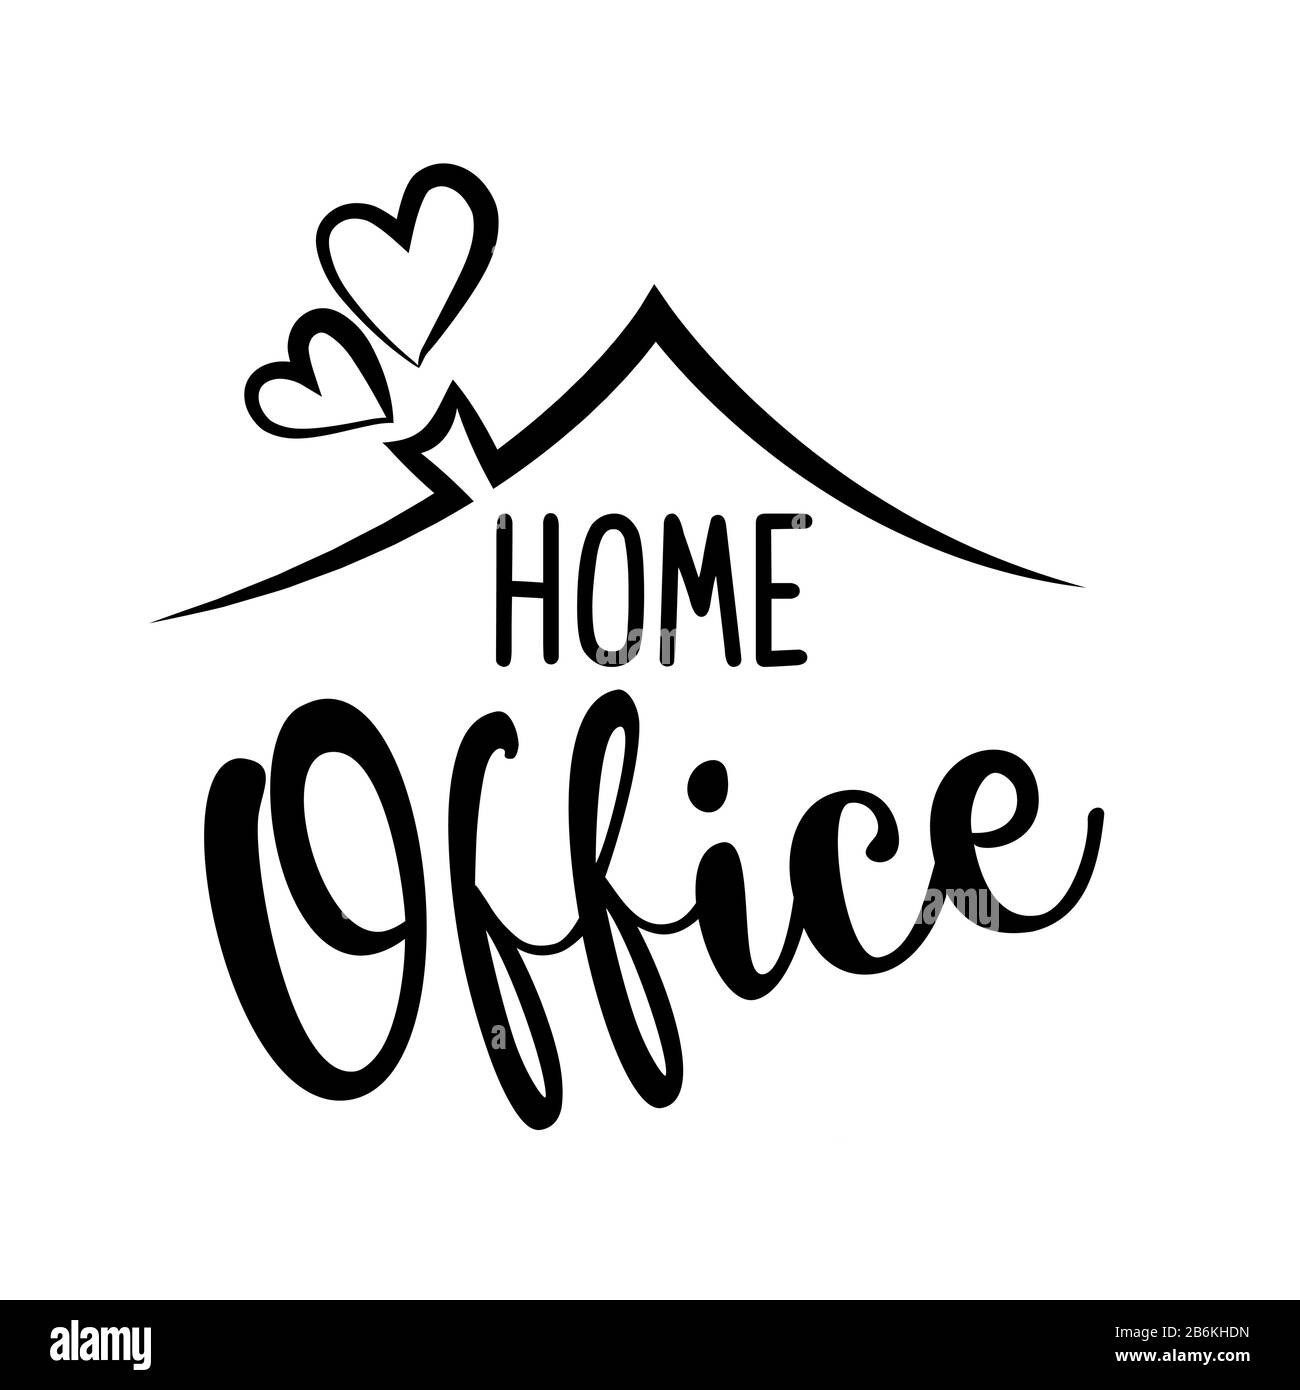 Home office logo - Typography corporate logo. Handmade lettering print. Vector vintage illustration with hearts, roof and chimney. Stock Vector